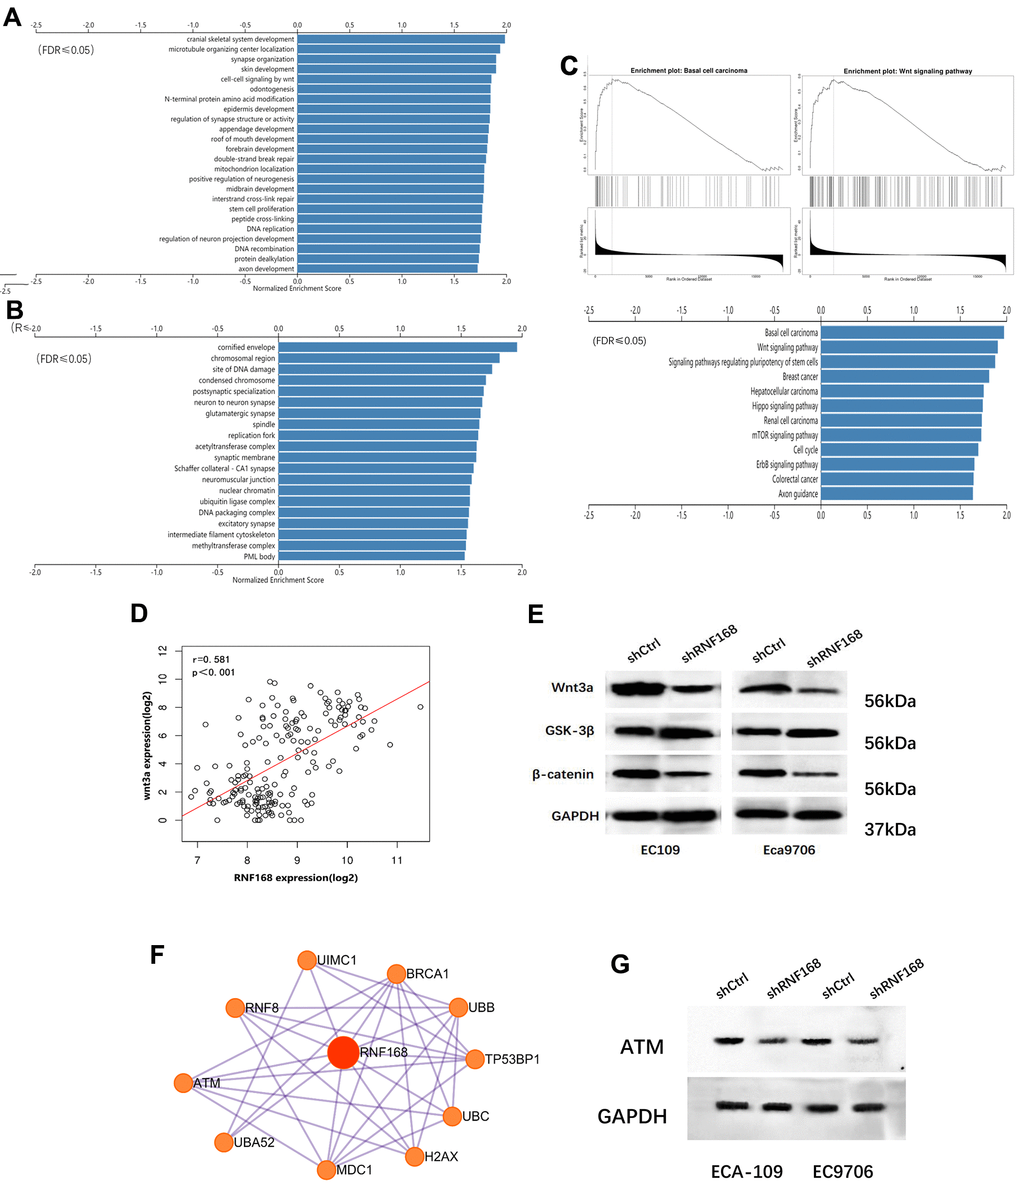 (A) and (B) Enrichment analysis of differentially expressed genes in 184 cases of esophageal cancer from the TCGA database; (C) Pathway enrichment analysis; (D) correlation between WNT3A and RNF168 mRNA levels; (E) Wnt/β-catenin signaling pathway protein component levels in ECA-109 and EC9706 cells after transduction; (F) PPI network for RNF168. (G) RNF168 and ATM expression by Western blot.